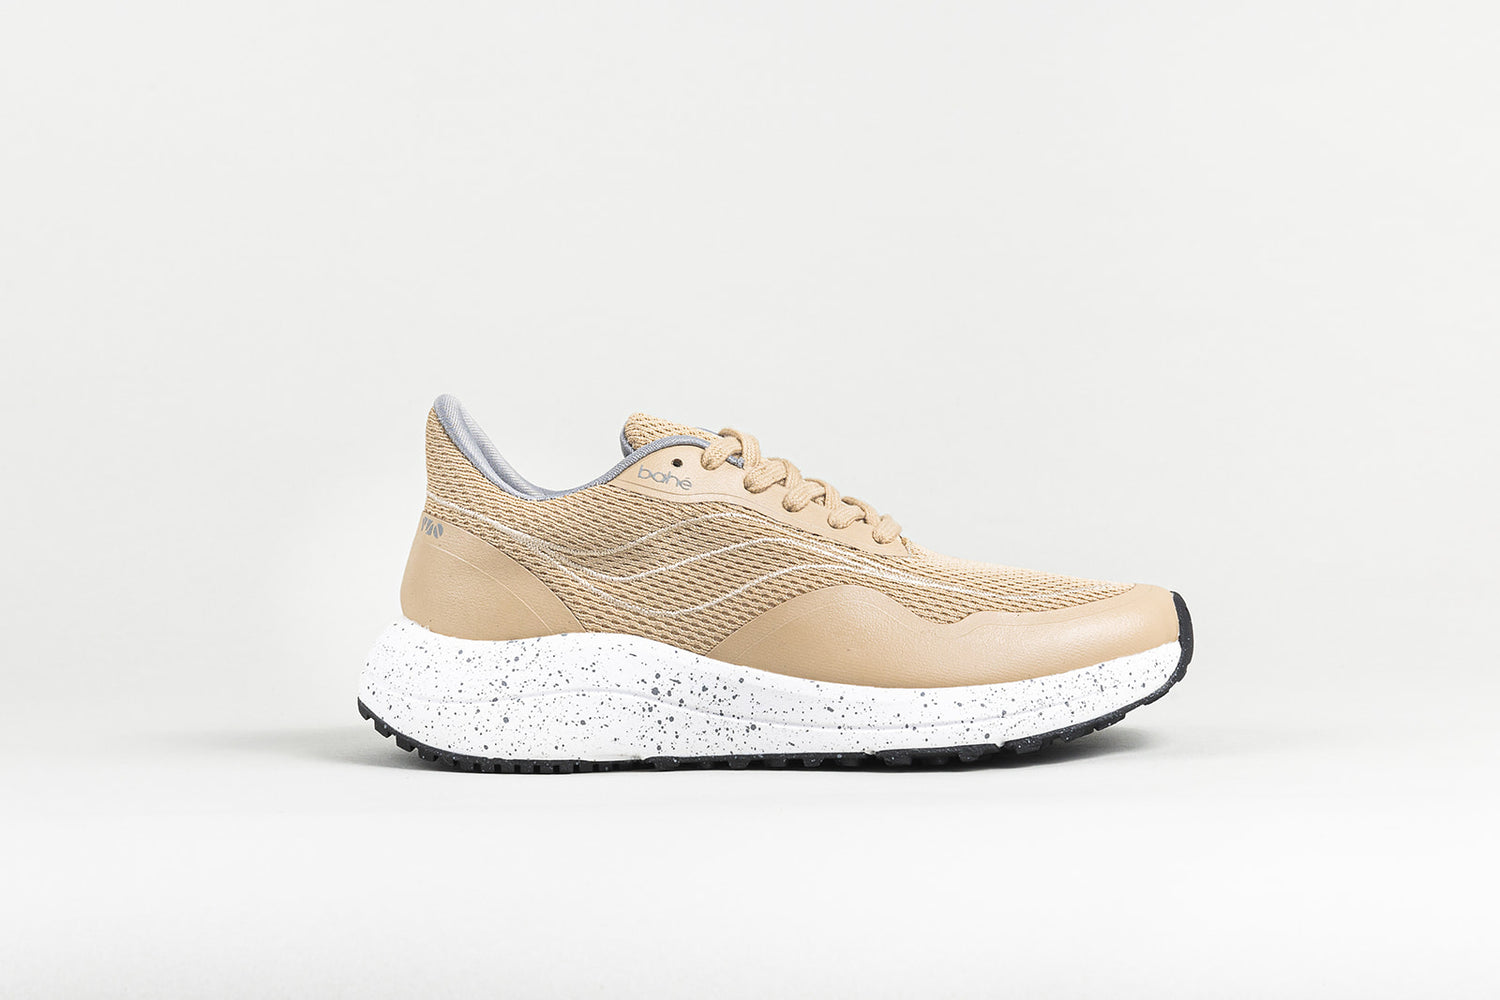 Profile view of Bahé recharge grounding shoe in Sandstone (beige)